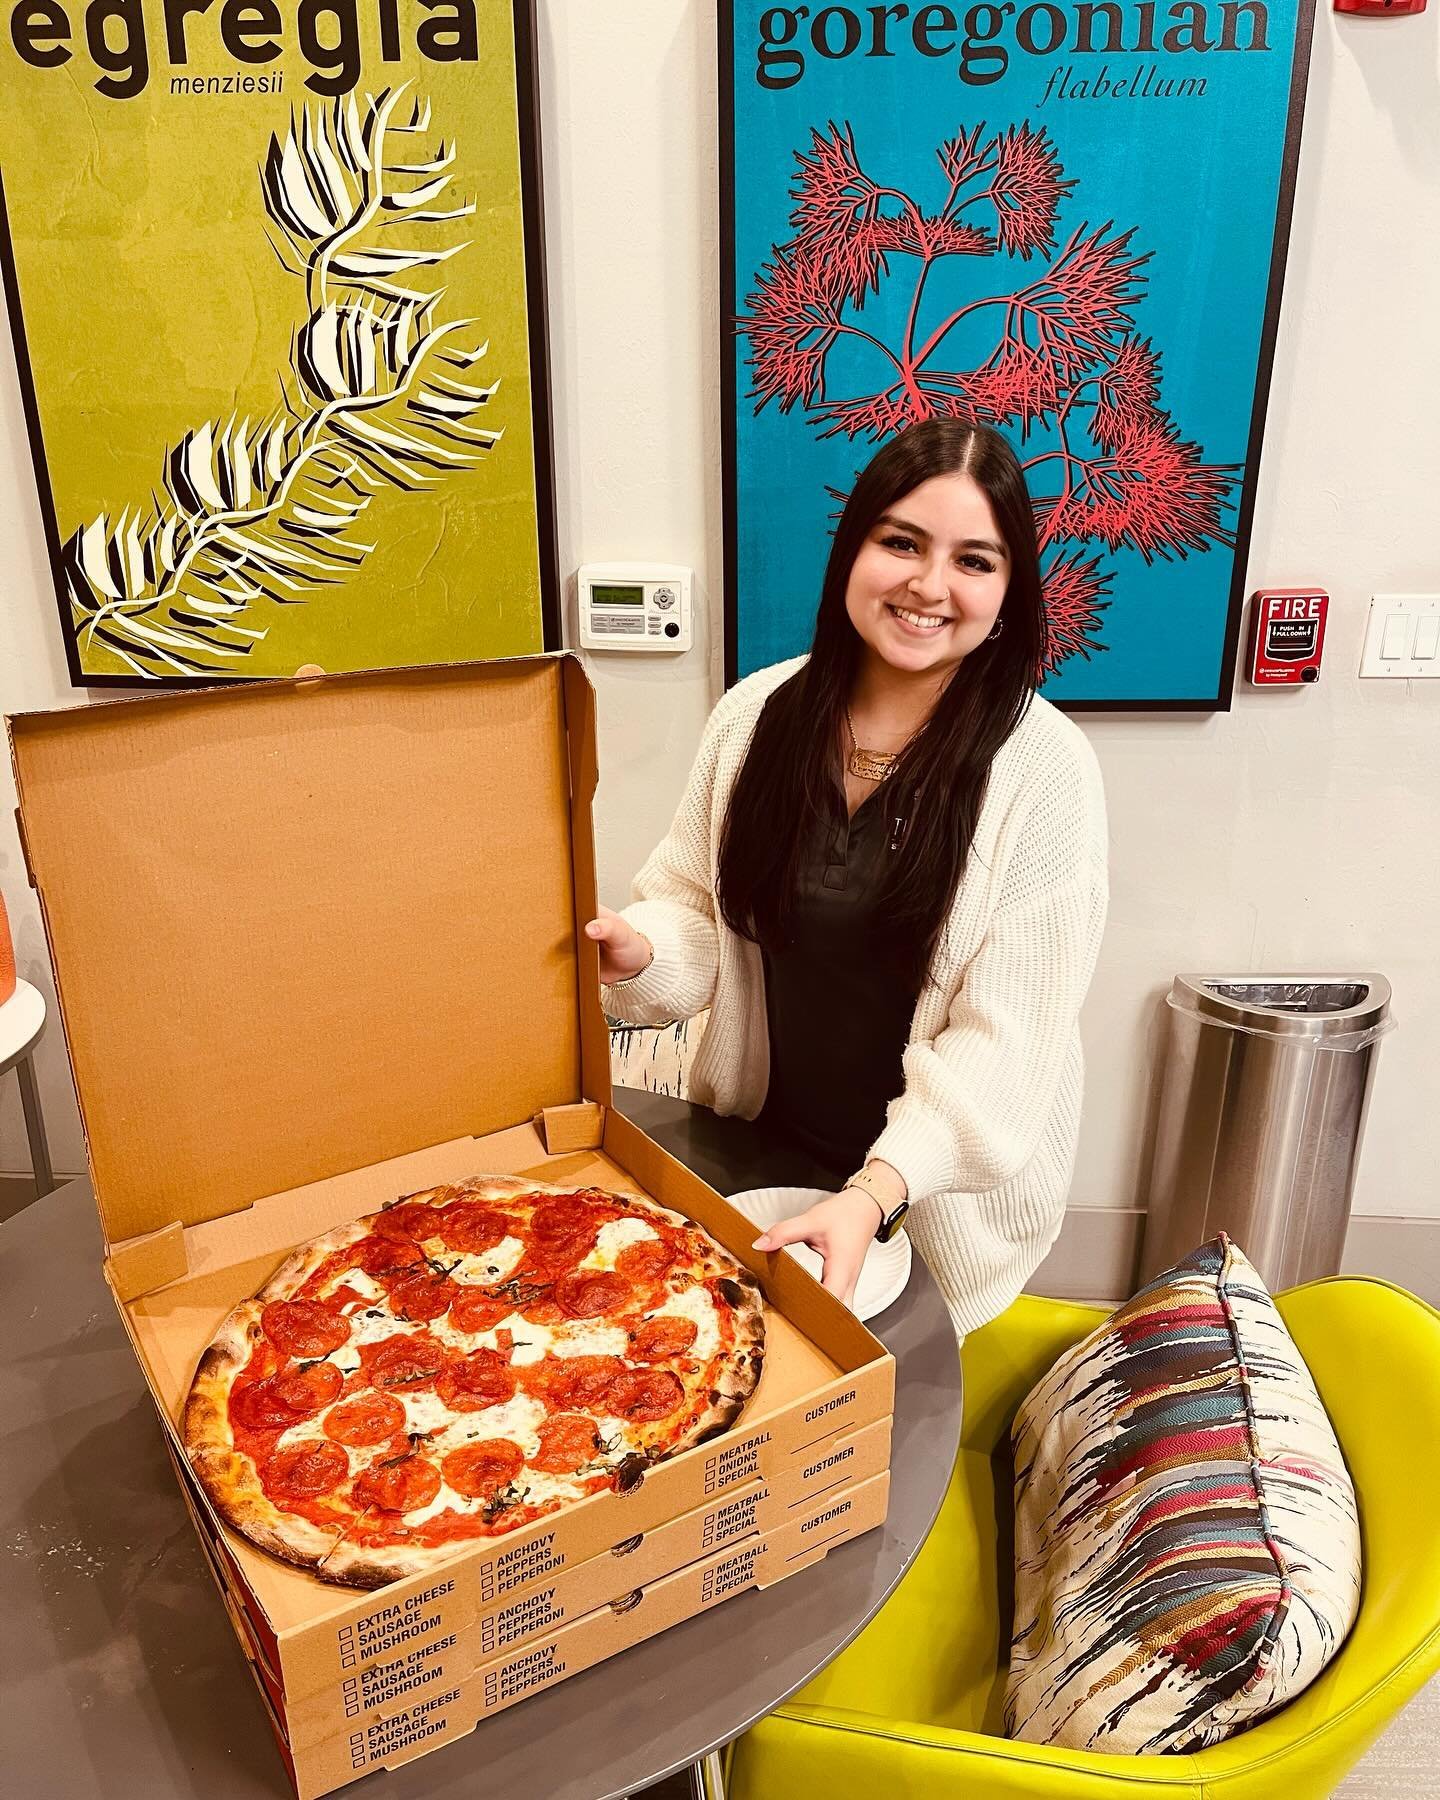 Prepping for finals? Stop by the leasing office for a quick study snack 🍕 
&bull;
&bull;
&bull;
#livethereef #swfl #fgcu #fsw #finalsweek #finalcountdown #study #studymotivation #exams #pizza